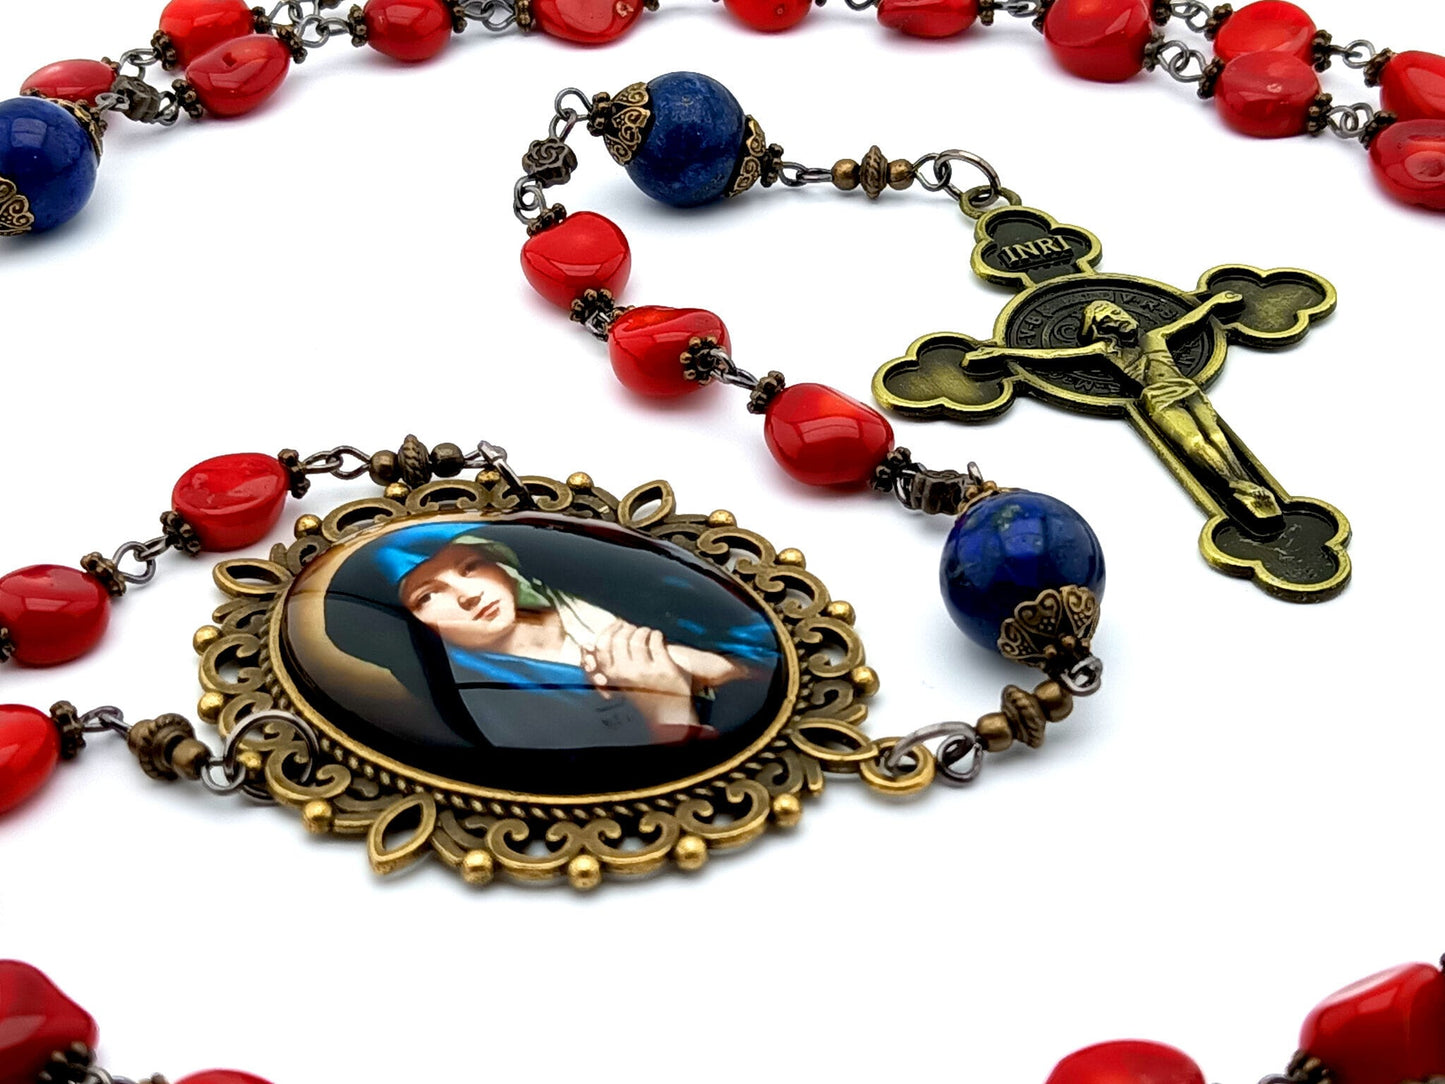 Our Lady of Sorrows unique rosary beads with red gemstone beads, lapis lazuli pater beads, bronze picture centre medal and crucifix.